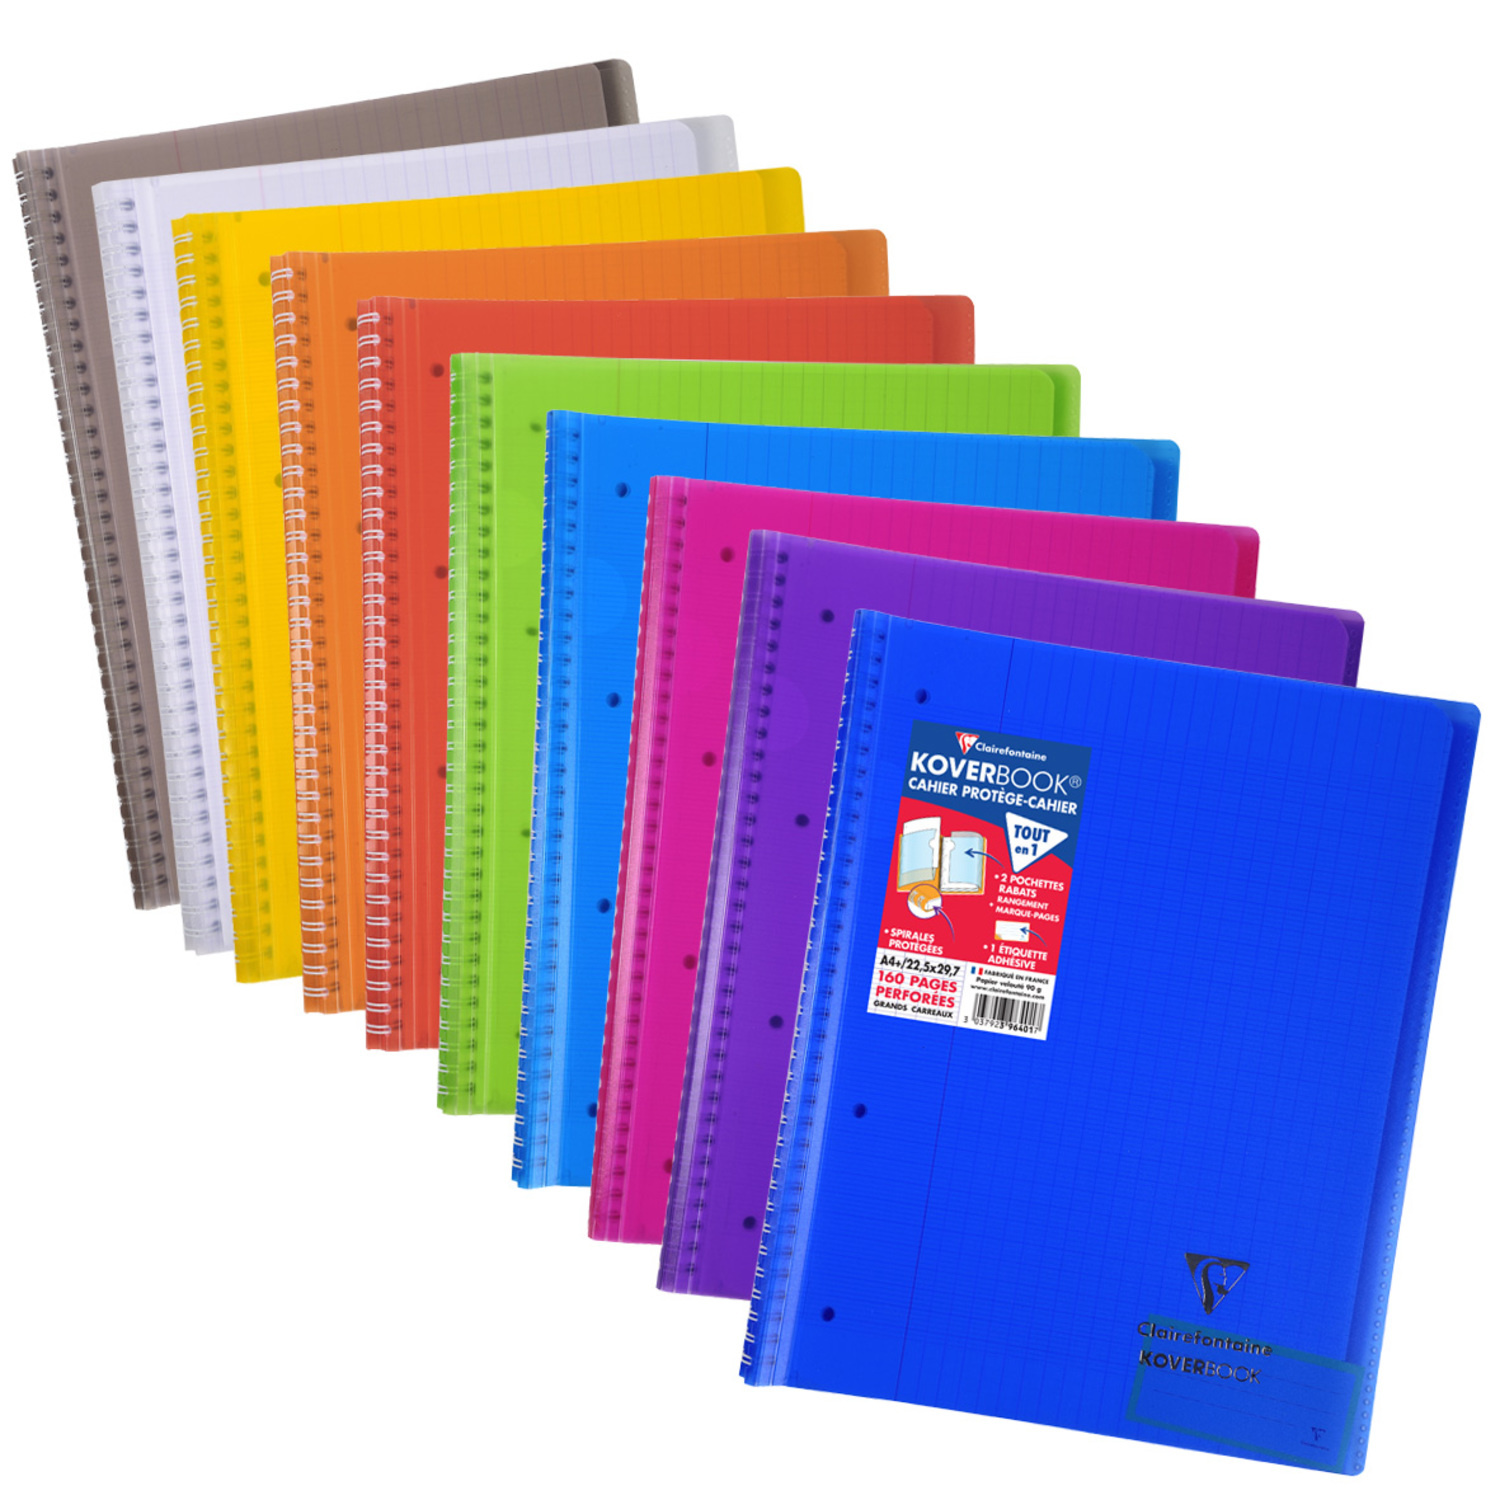 Cahier Spirale 24x32 Clairefontaine Koverbook 160 pages